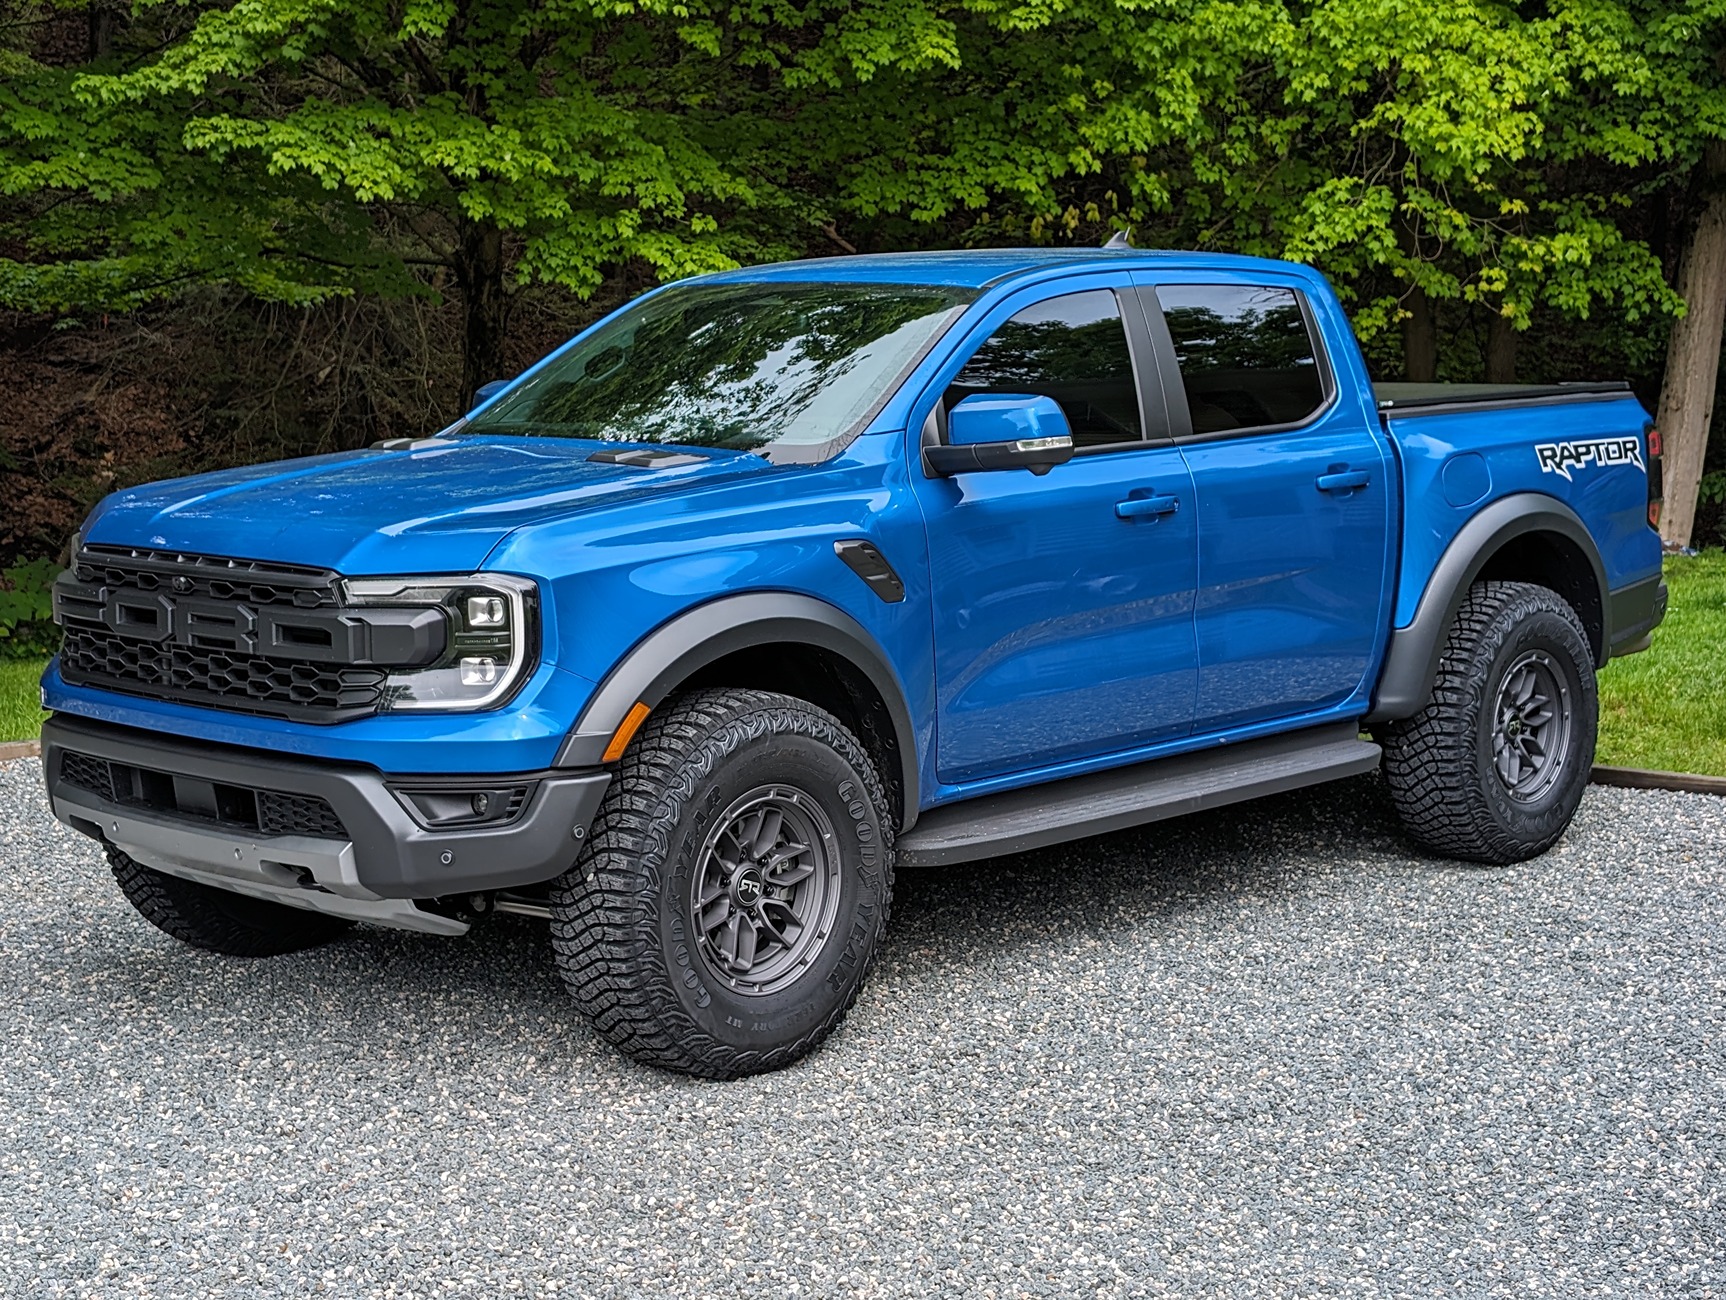 Ford Ranger New (Lighter) Shoes for the Raptor: RTR Evo 6 Satin Charcoal Wheels (17x9 +30) and Goodyear Territory MT 315/70-17 Tires PXL_20240525_194435596